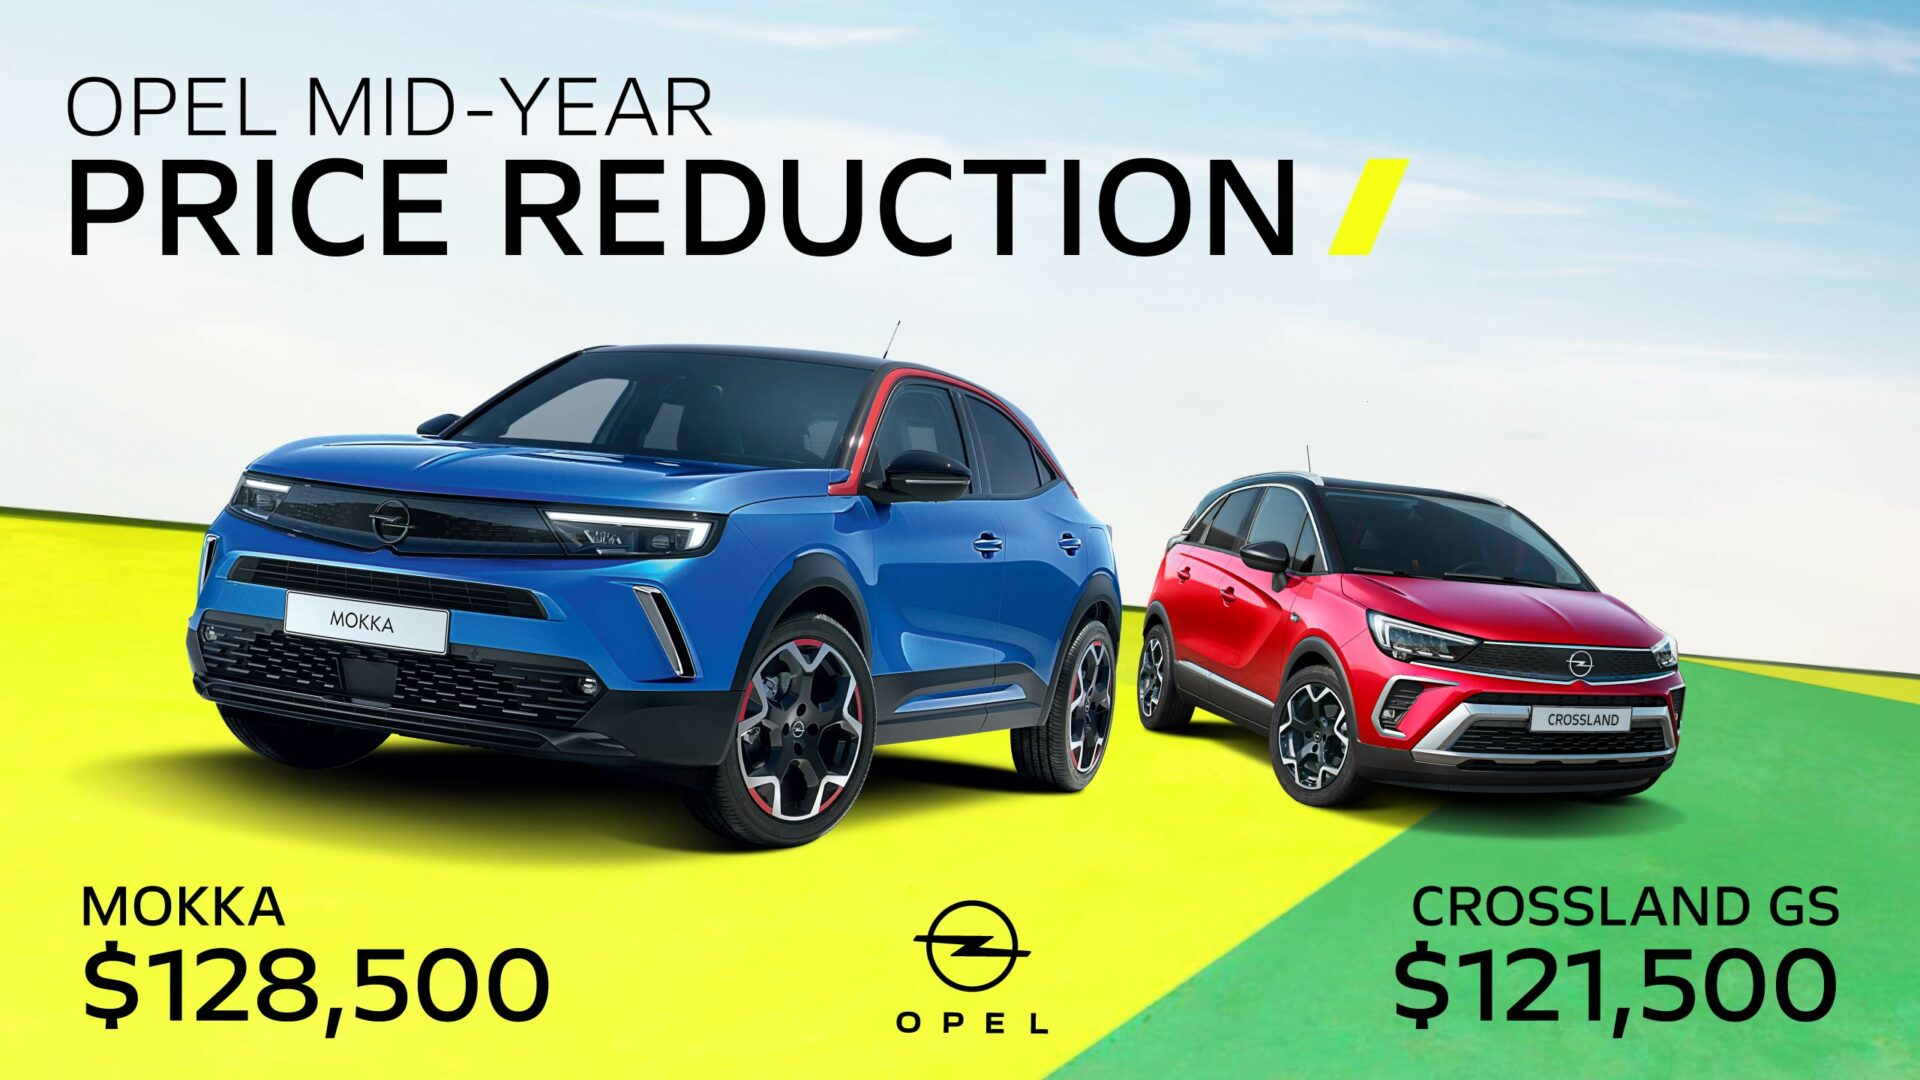 Opel Mid-Year Price Reduction